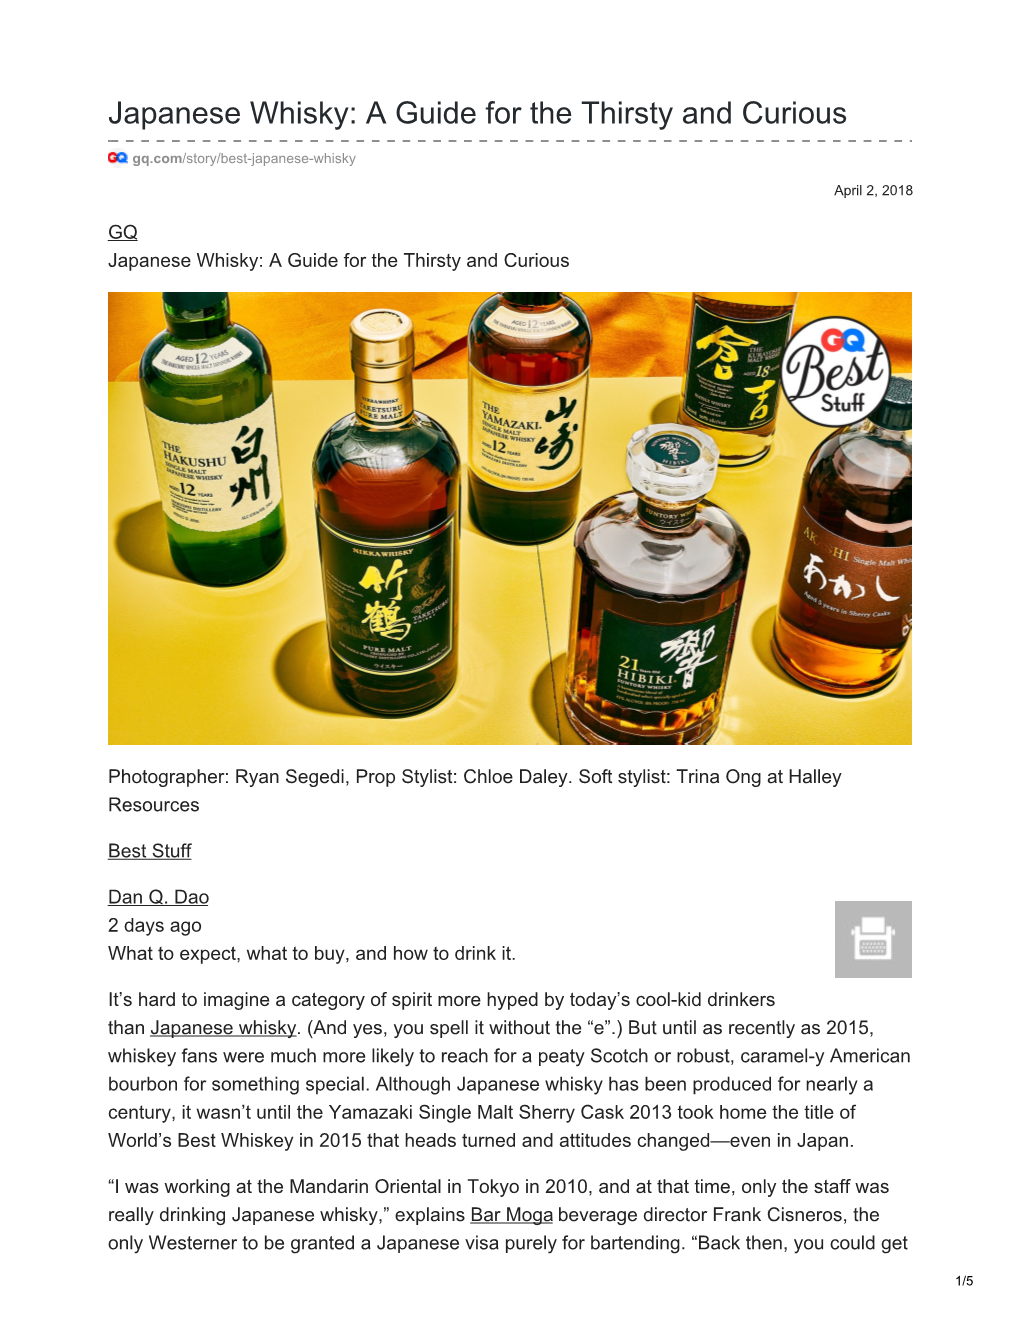 Japanese Whisky: a Guide for the Thirsty and Curious